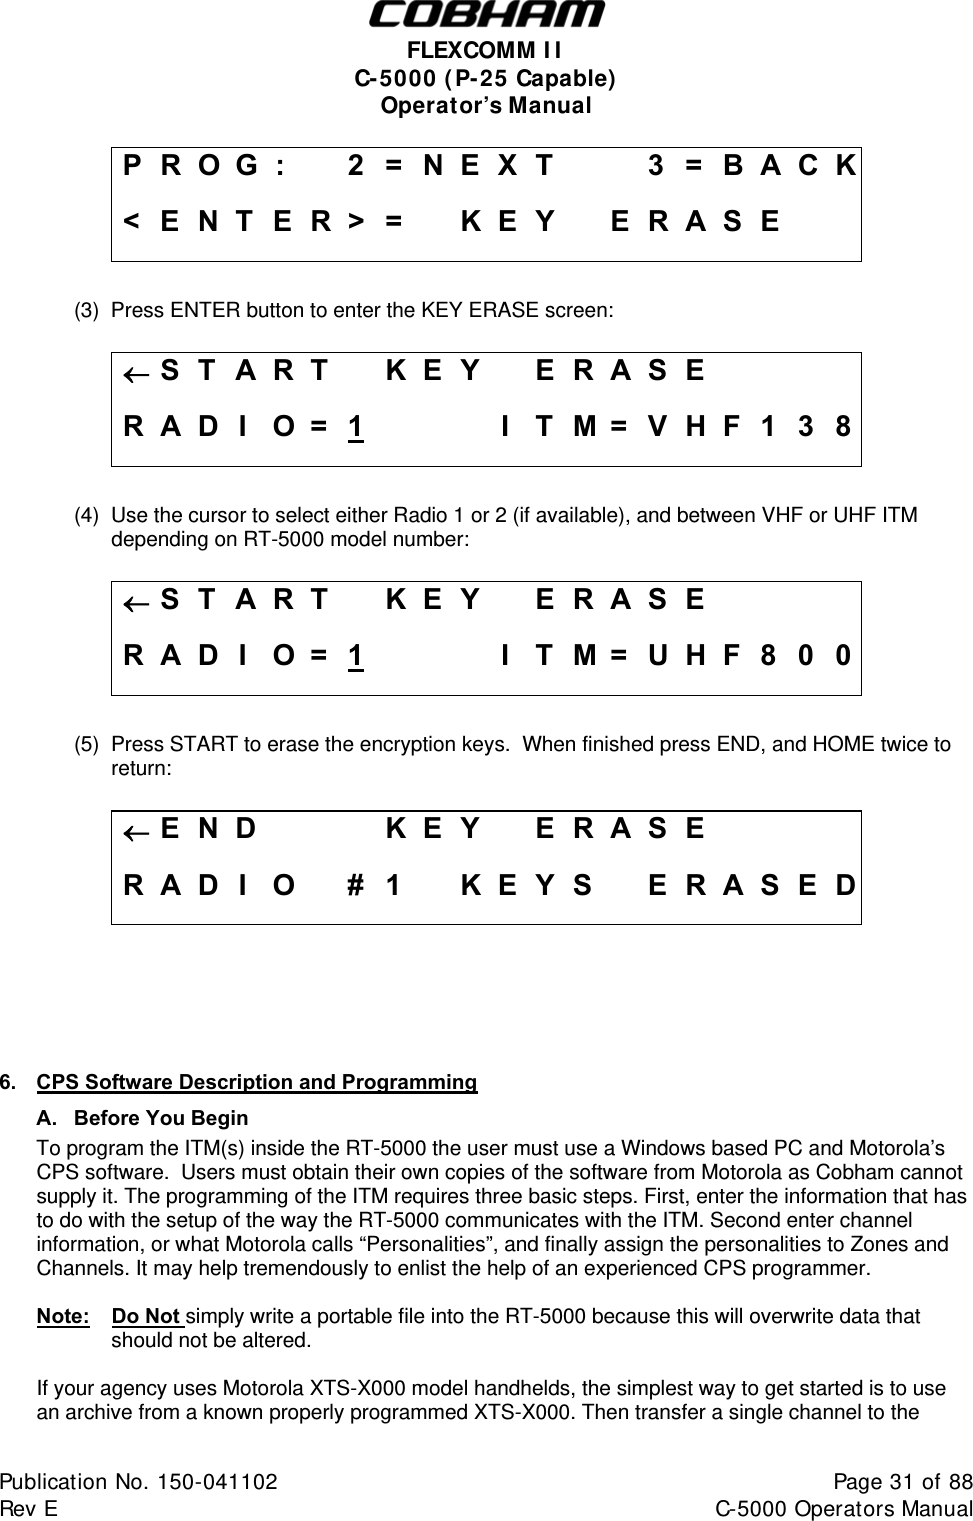  FLEXCOMM II C-5000 (P-25 Capable) Operator’s Manual P R O G :    2 = N E X T     3 = B A C K &lt; E N T E R &gt; =   K E Y   E R A S E      (3)  Press ENTER button to enter the KEY ERASE screen:  S T A R T  KEY  ERASE     R A D I  O =  1    I T M = V H F 1 3 8  (4)  Use the cursor to select either Radio 1 or 2 (if available), and between VHF or UHF ITM depending on RT-5000 model number:   S T A R T  KEY  ERASE     R A D I  O =  1    I T M = U H F 8 0 0  (5)  Press START to erase the encryption keys.  When finished press END, and HOME twice to return:  E N D    KEY  ERASE     R A D I O  # 1  K E Y S  E R A S E D      6.  CPS Software Description and Programming A. Before You Begin To program the ITM(s) inside the RT-5000 the user must use a Windows based PC and Motorola’s CPS software.  Users must obtain their own copies of the software from Motorola as Cobham cannot supply it. The programming of the ITM requires three basic steps. First, enter the information that has to do with the setup of the way the RT-5000 communicates with the ITM. Second enter channel information, or what Motorola calls “Personalities”, and finally assign the personalities to Zones and Channels. It may help tremendously to enlist the help of an experienced CPS programmer.   Note:   Do Not simply write a portable file into the RT-5000 because this will overwrite data that should not be altered.    If your agency uses Motorola XTS-X000 model handhelds, the simplest way to get started is to use   an archive from a known properly programmed XTS-X000. Then transfer a single channel to the Publication No. 150-041102  Page 31 of 88  Rev E  C-5000 Operators Manual    